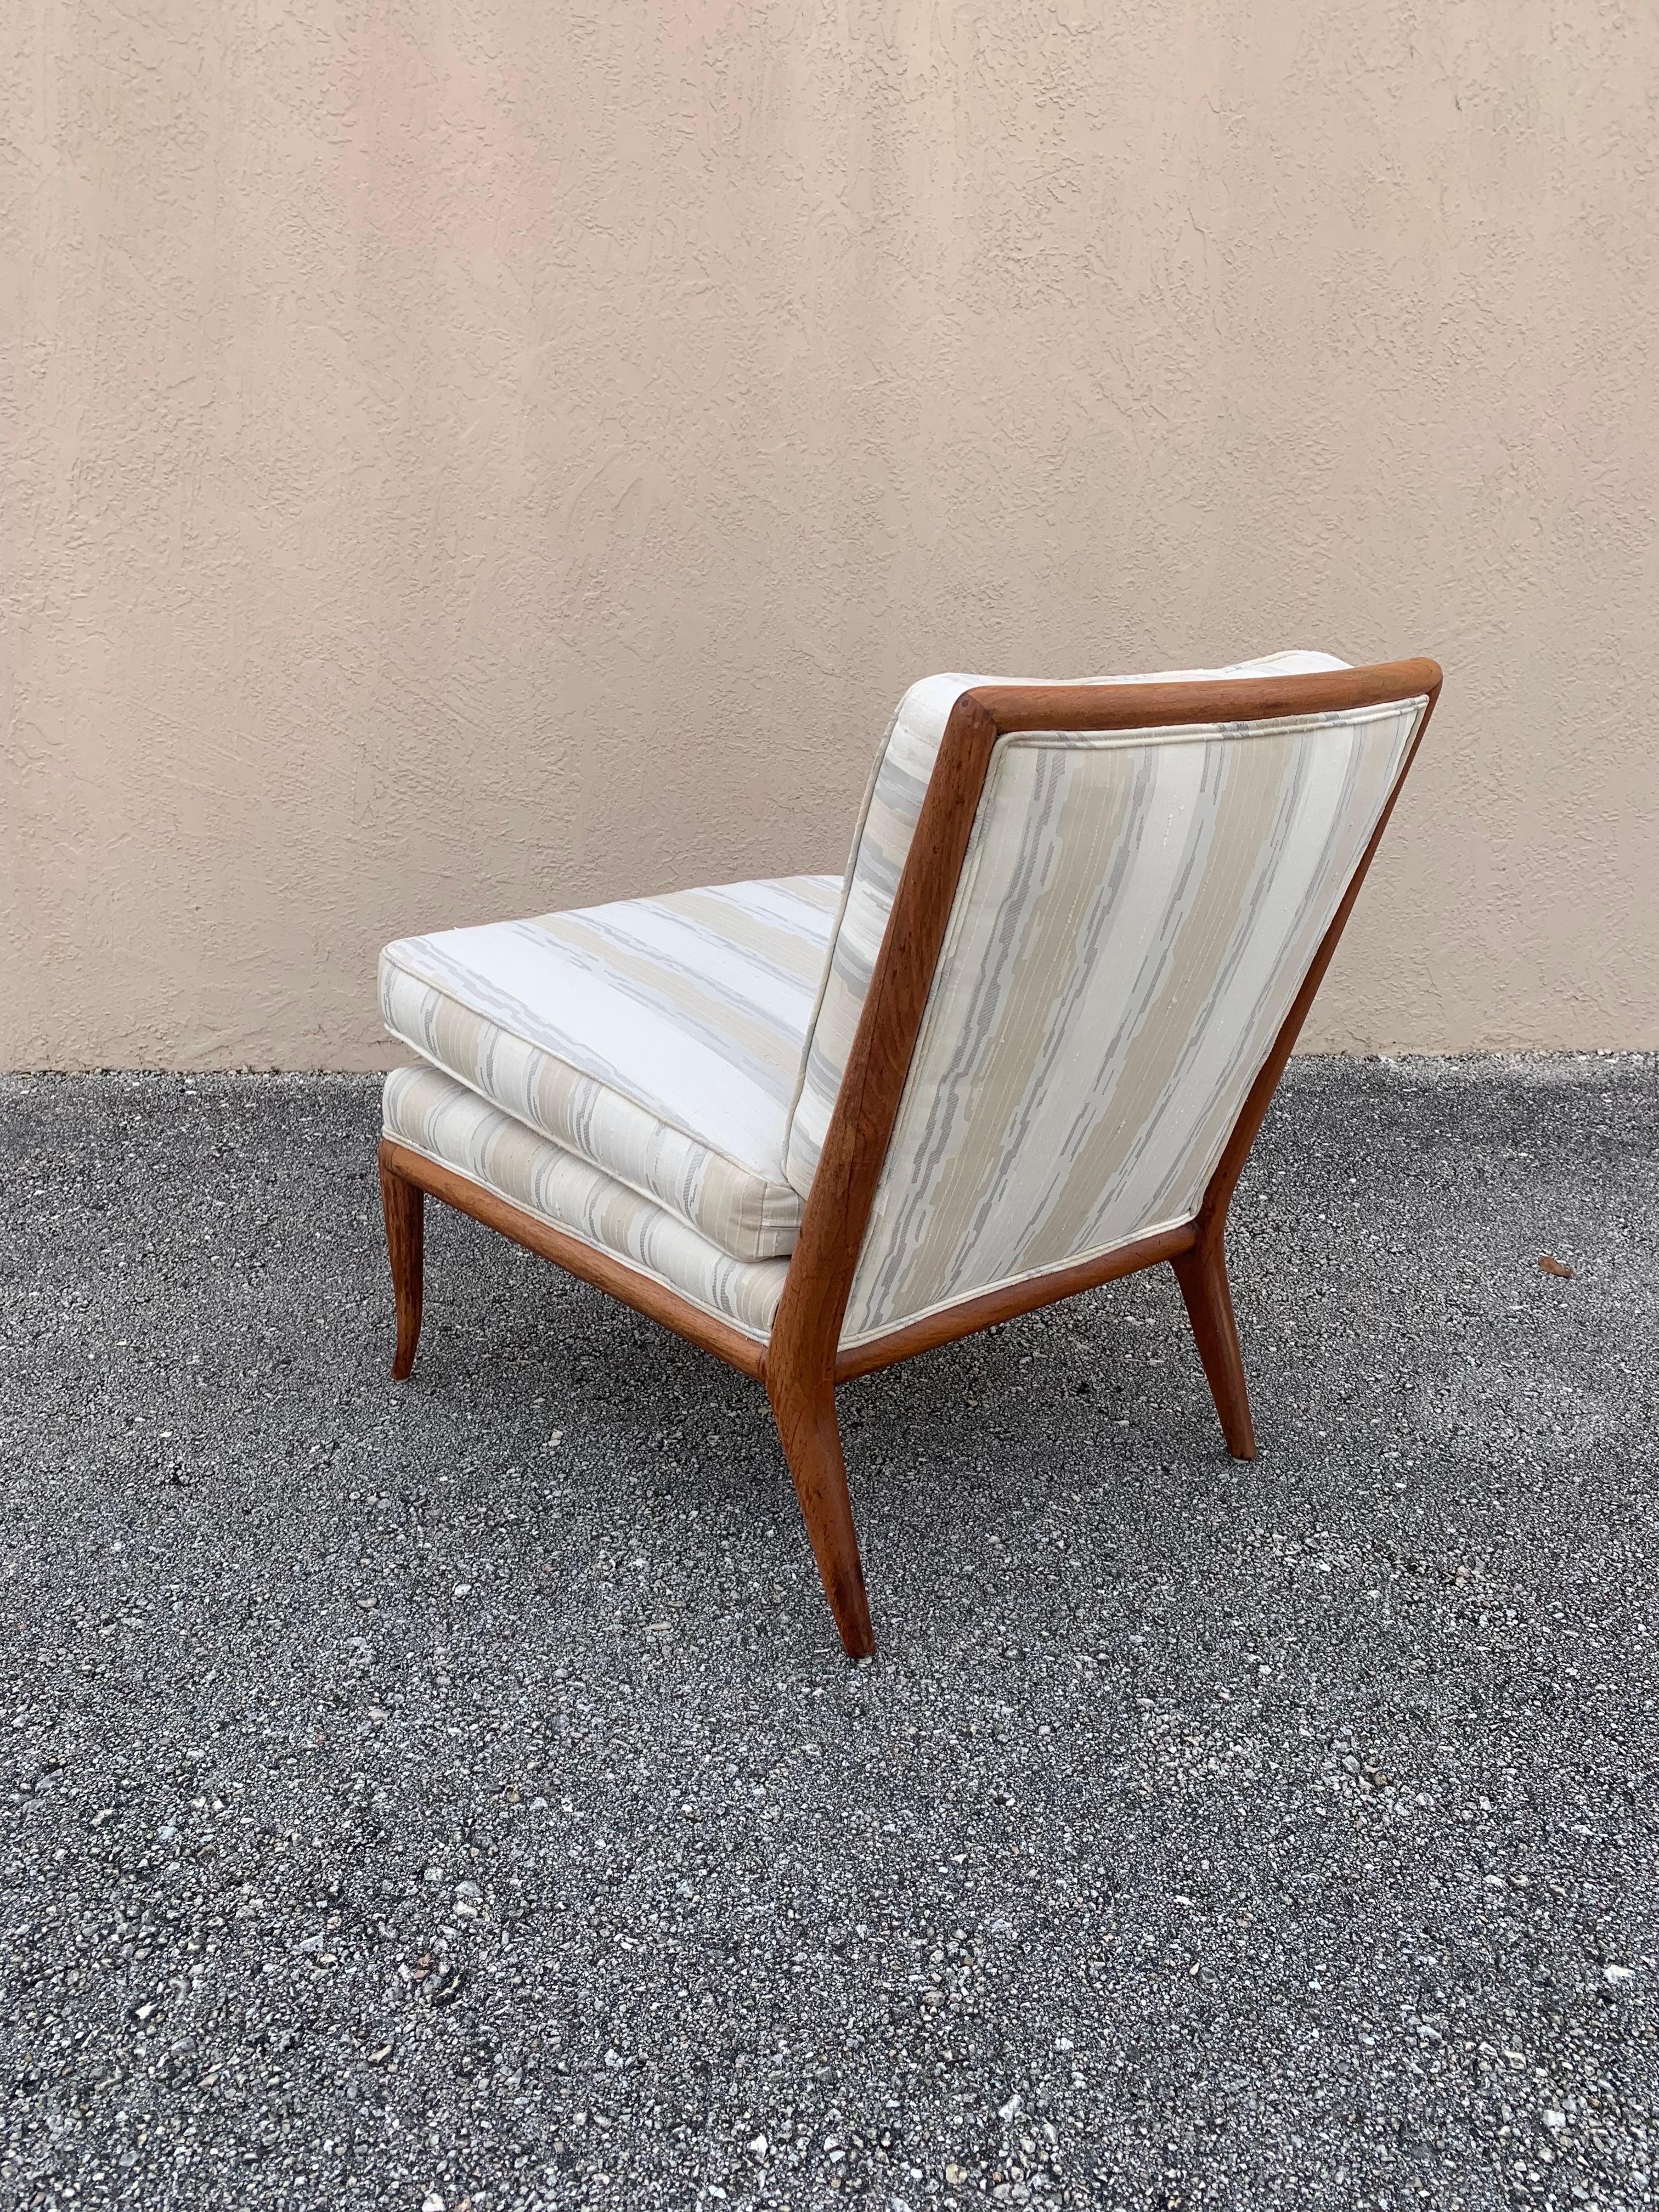 Timeless elegant design by T.H. Robsjohn-Gibbings in original finish. Believed to be original upholstery but could have been redone in its lifetime. Some stains to the upholstery could be updated or cleaned. Frame has original finish. Shows some